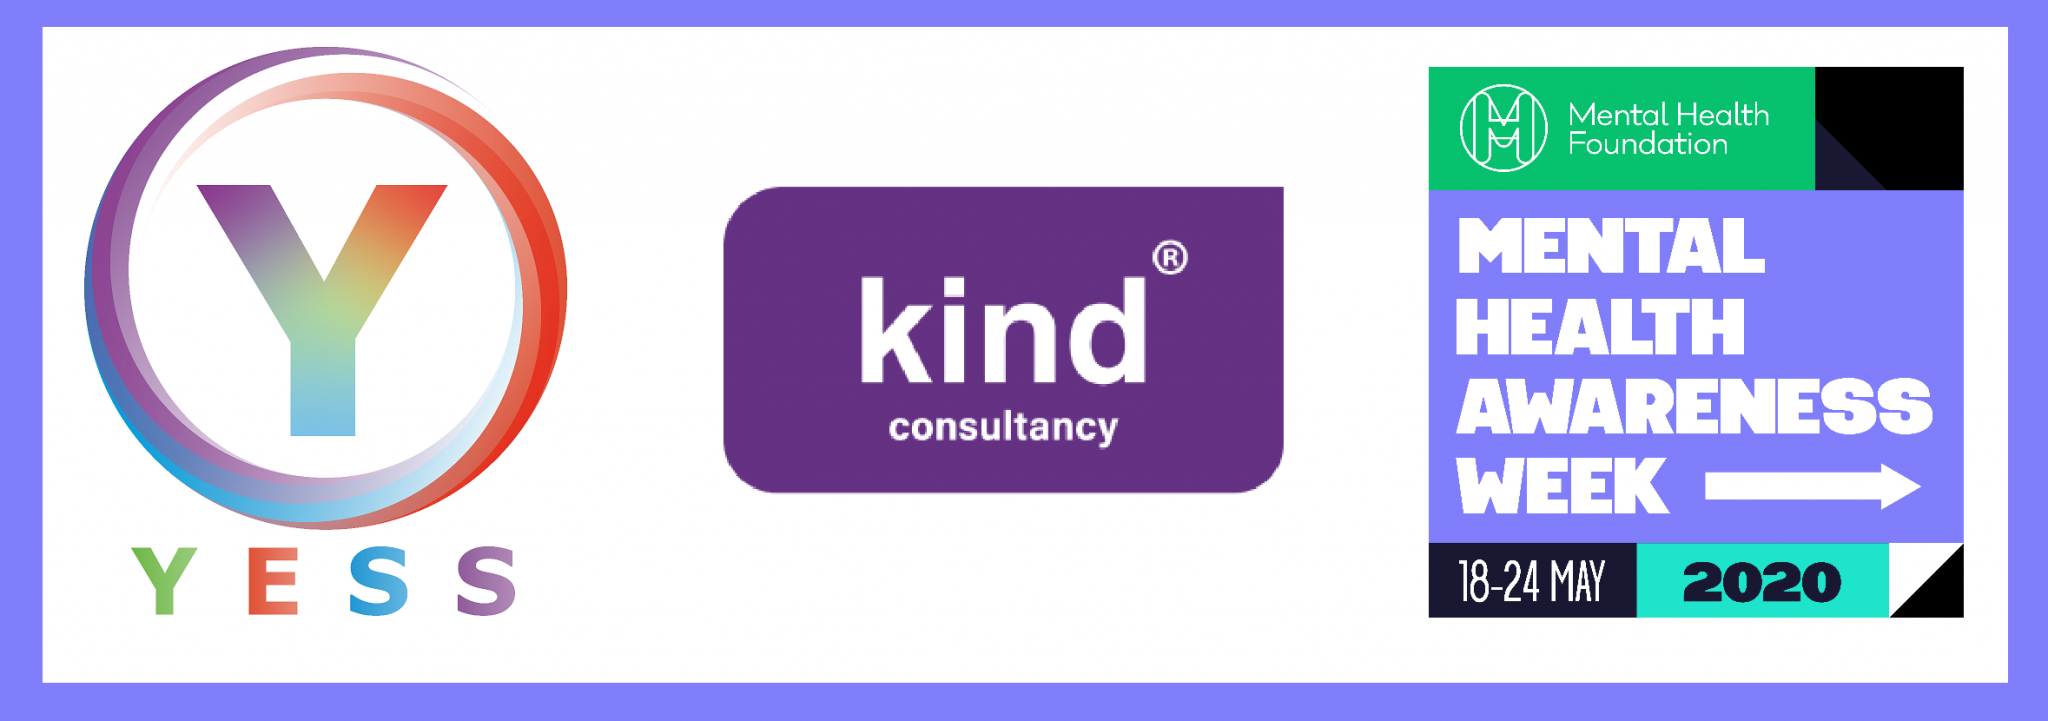 Support YESS with Kind Consultancy as part of Mental Health Awareness Week